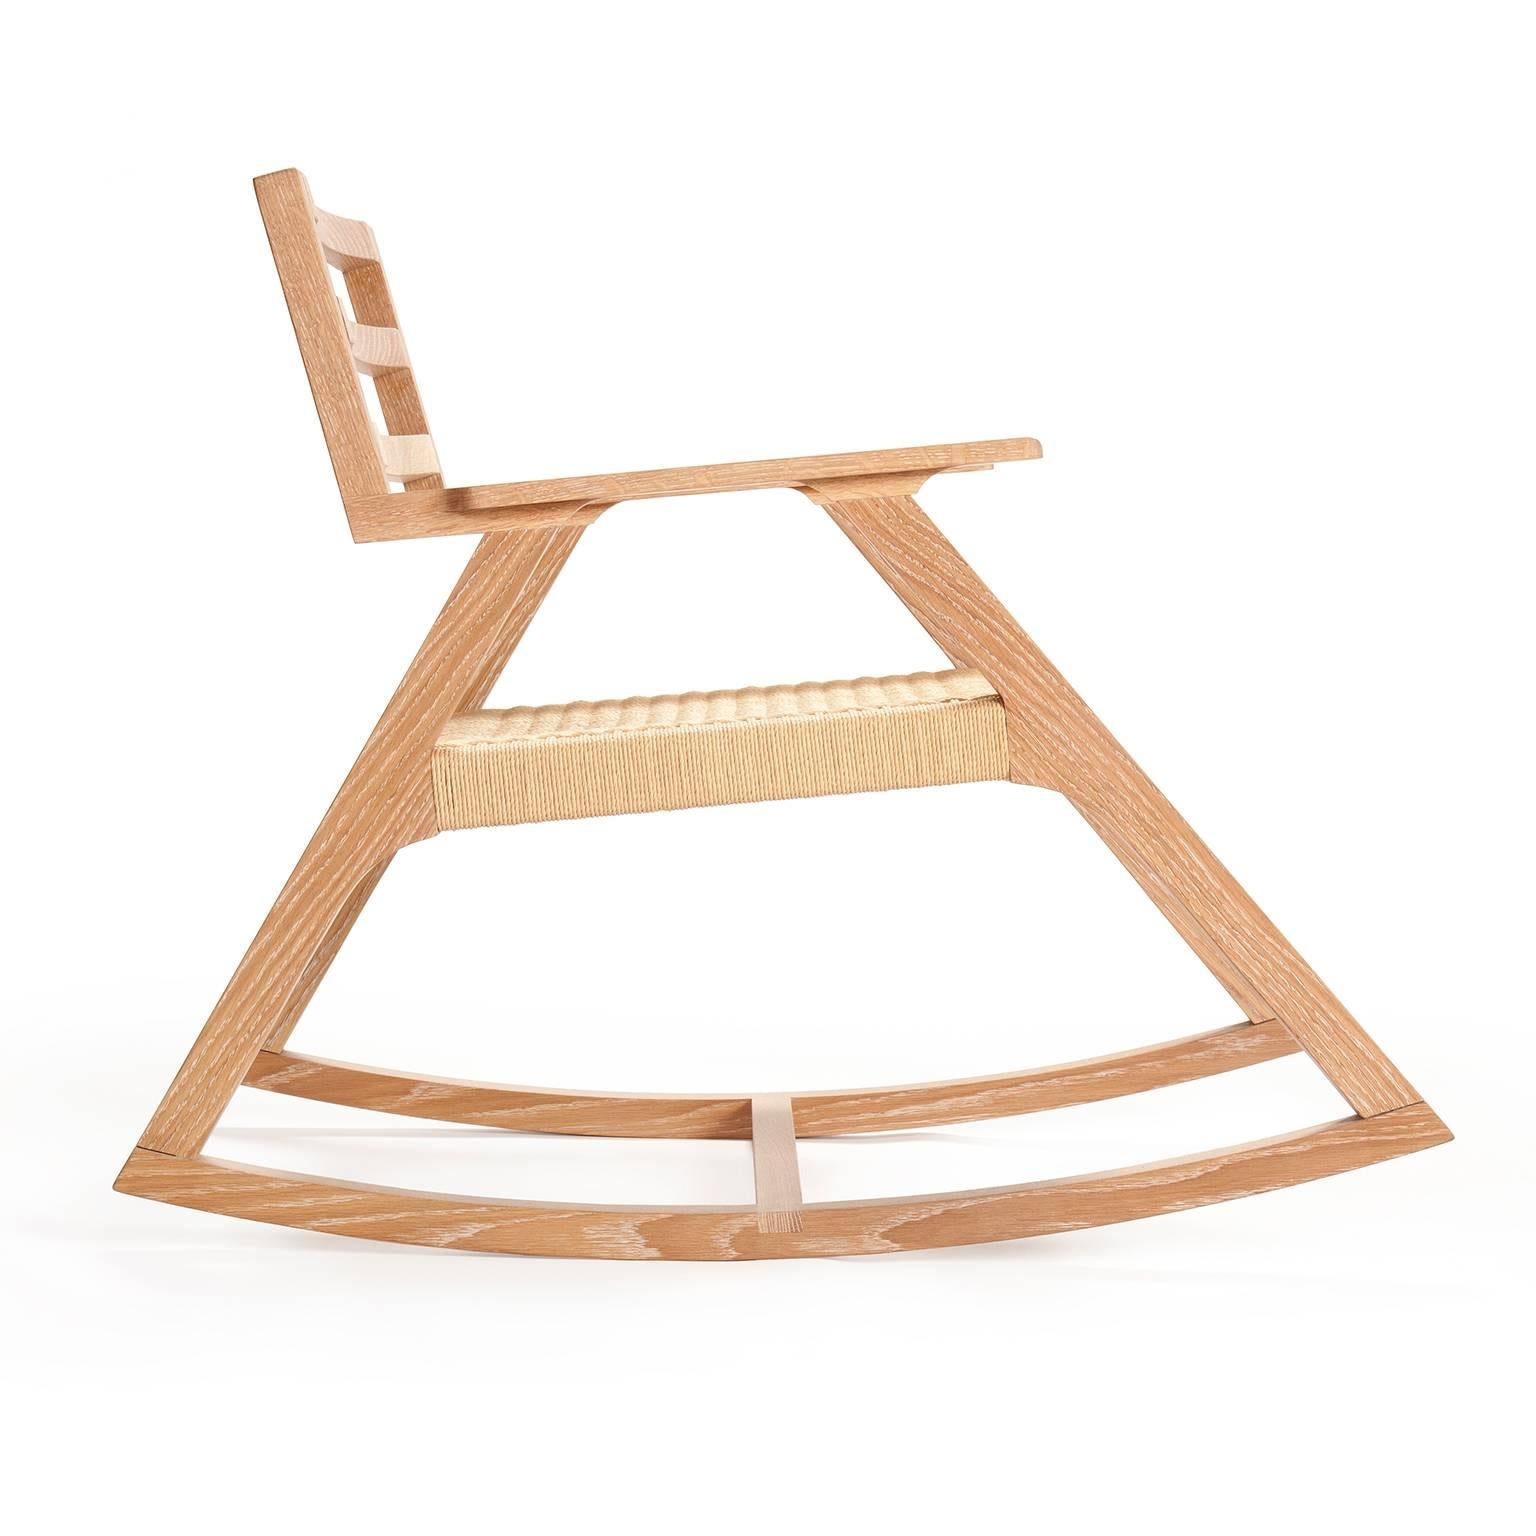 Our award-winning Giacomo rocking chair was the genesis for the Giacomo line of seating which now includes benches and chairs as well. Solid white oak construction and a handwoven danish cord seat. Lightly cerused / oiled finish.
Also available in